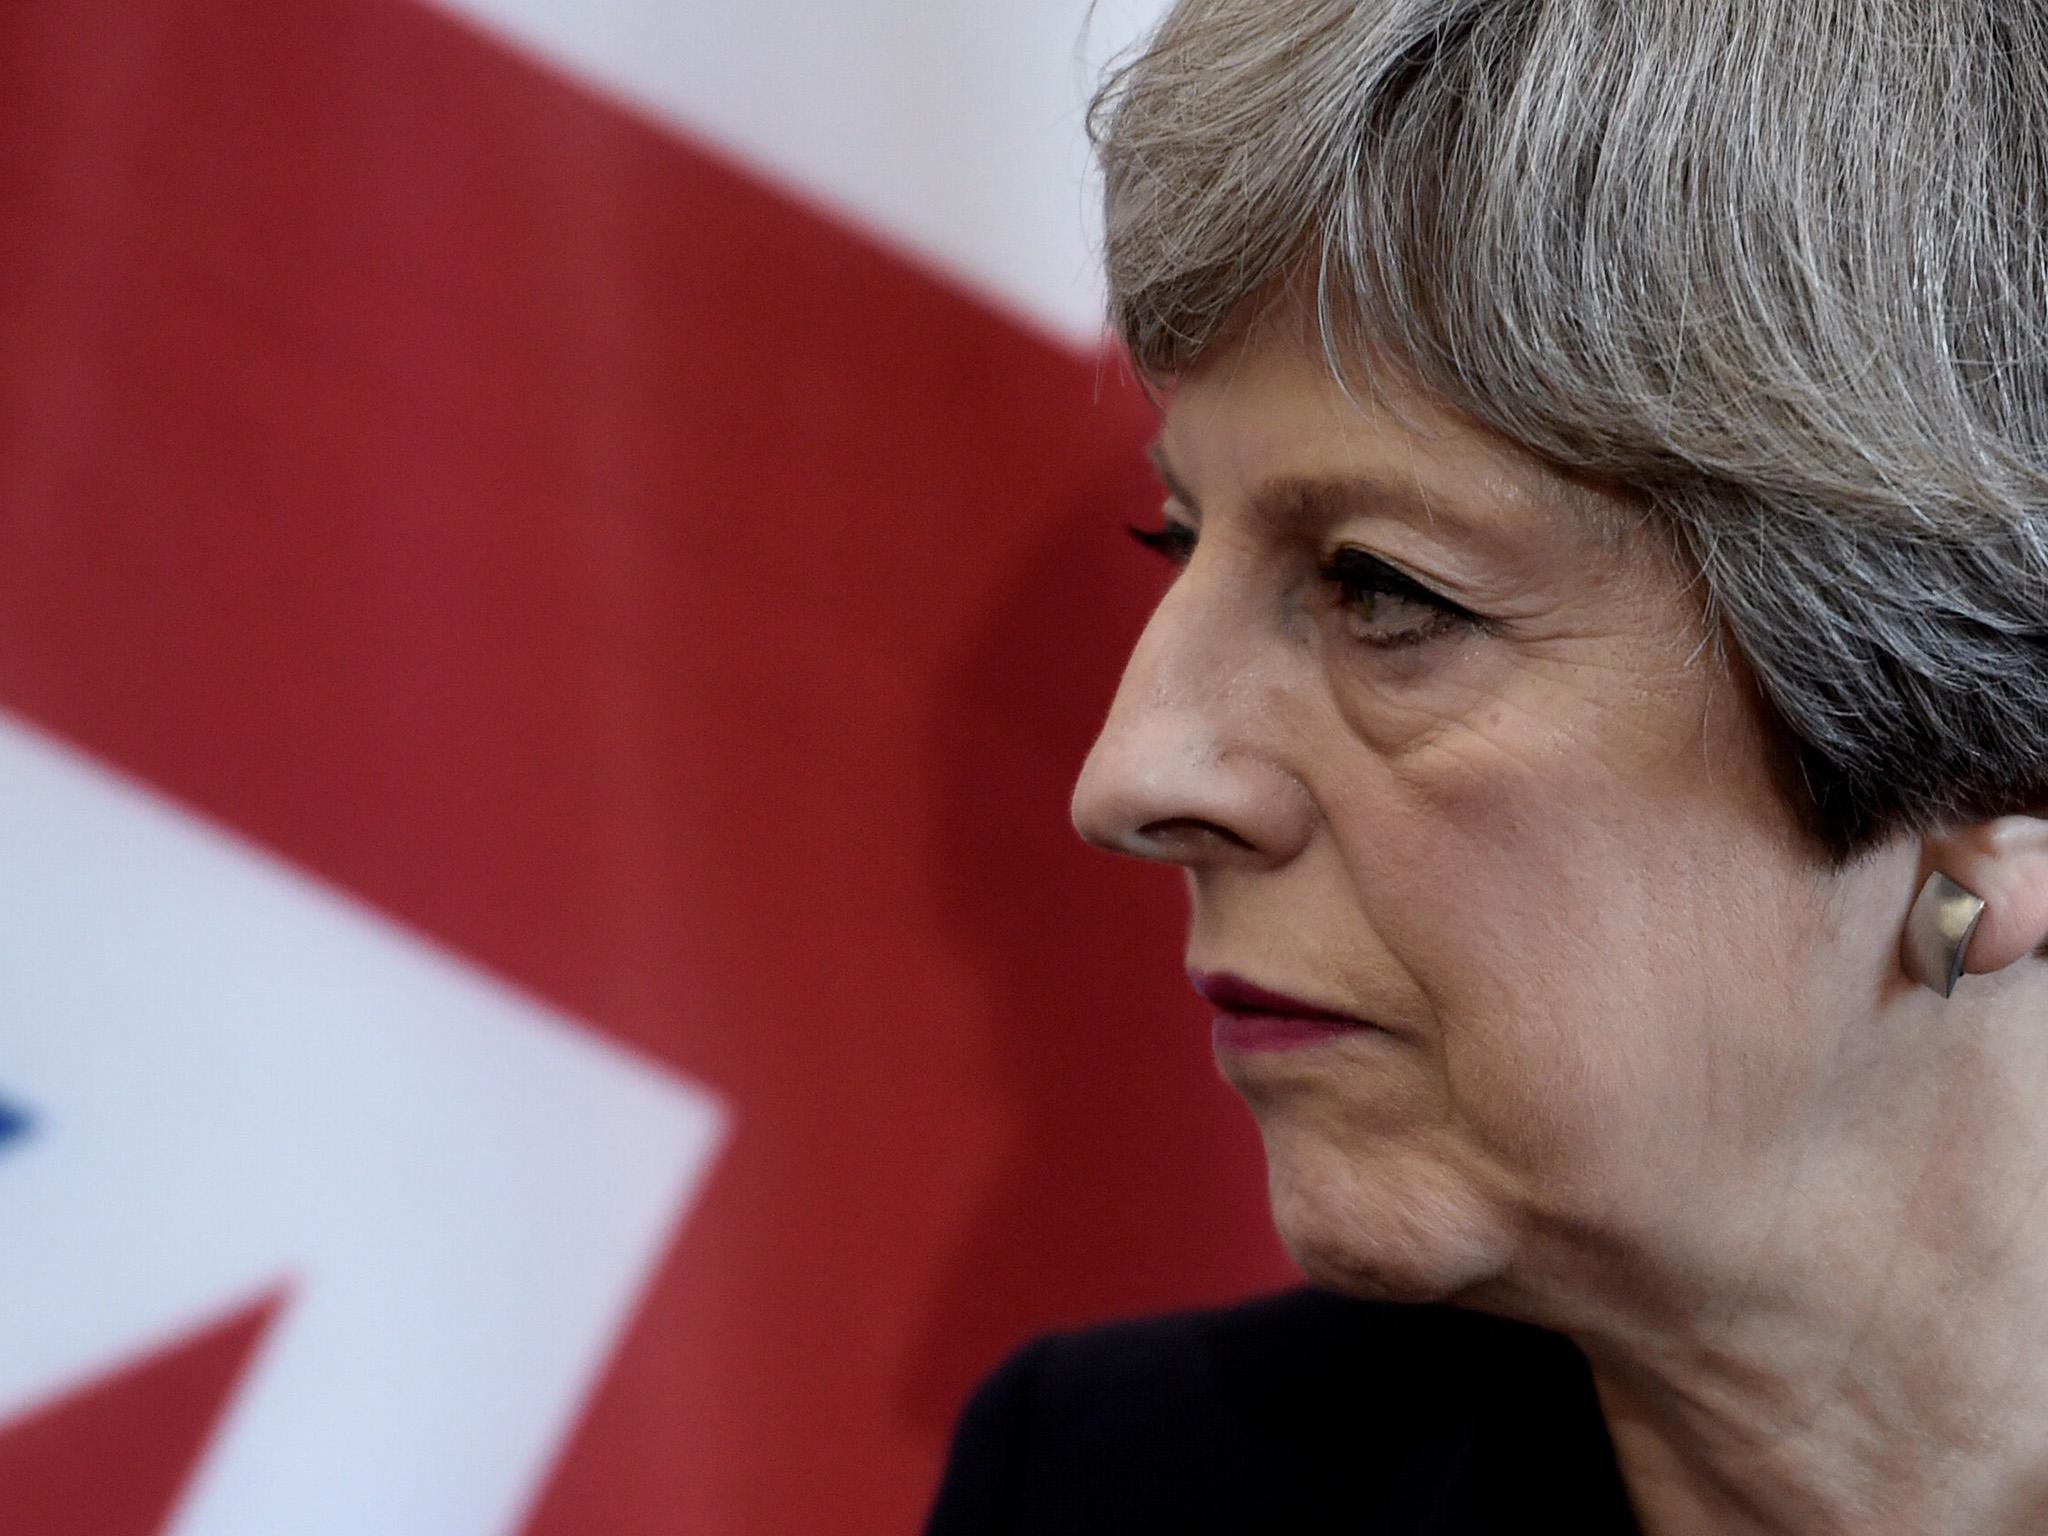 Theresa May has been accused of repeating party lines and not answering questions during interviews